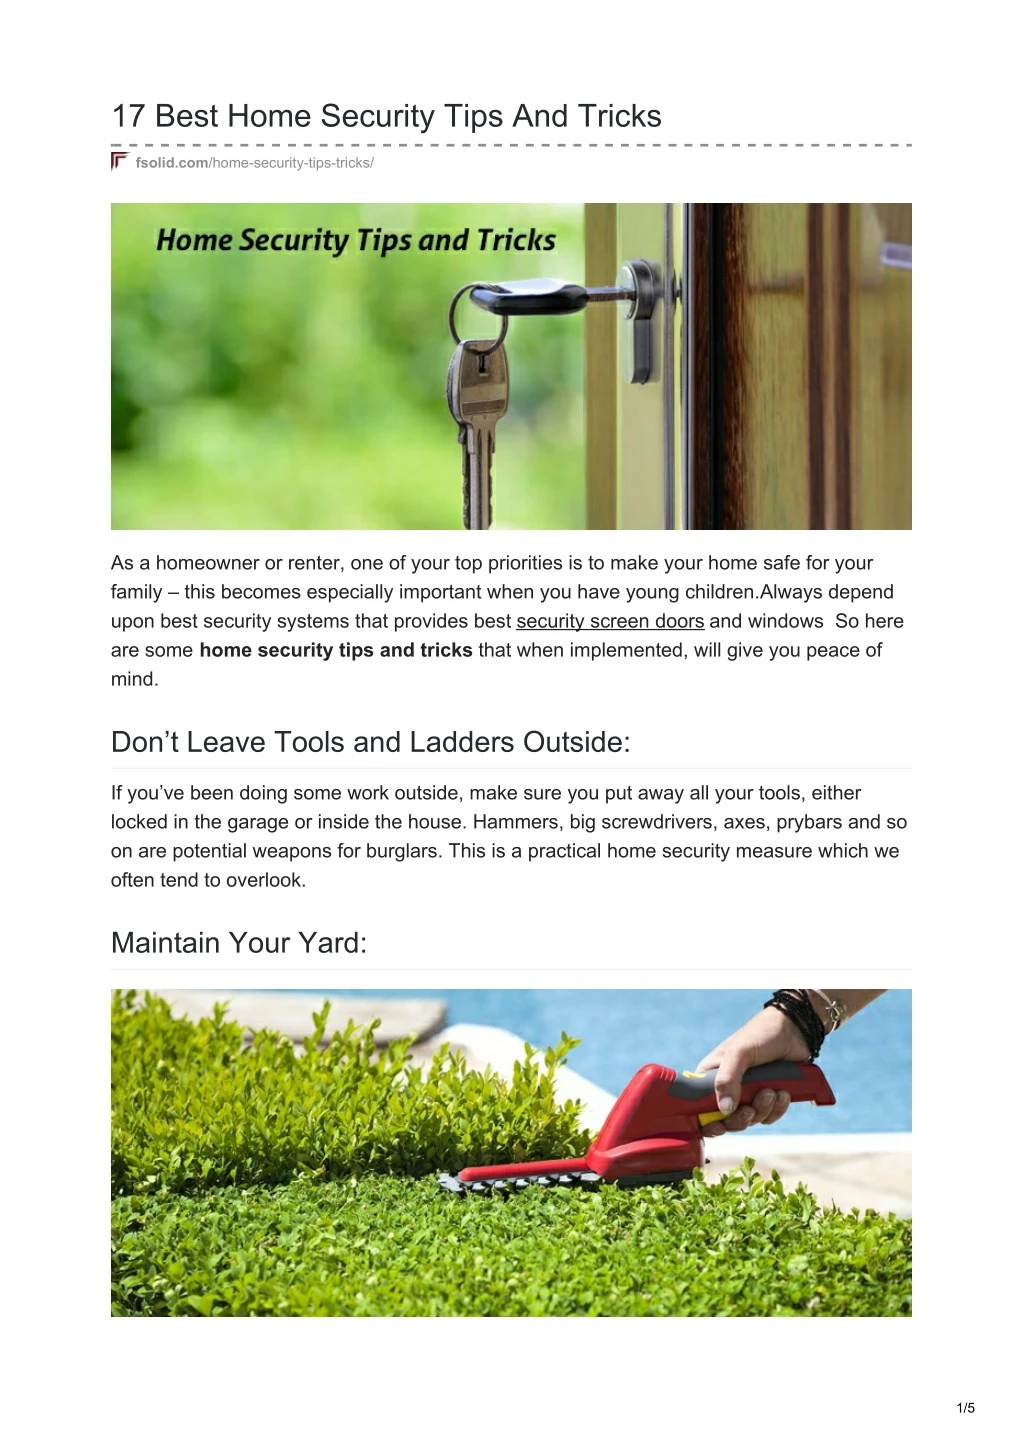 17 best home security tips and tricks